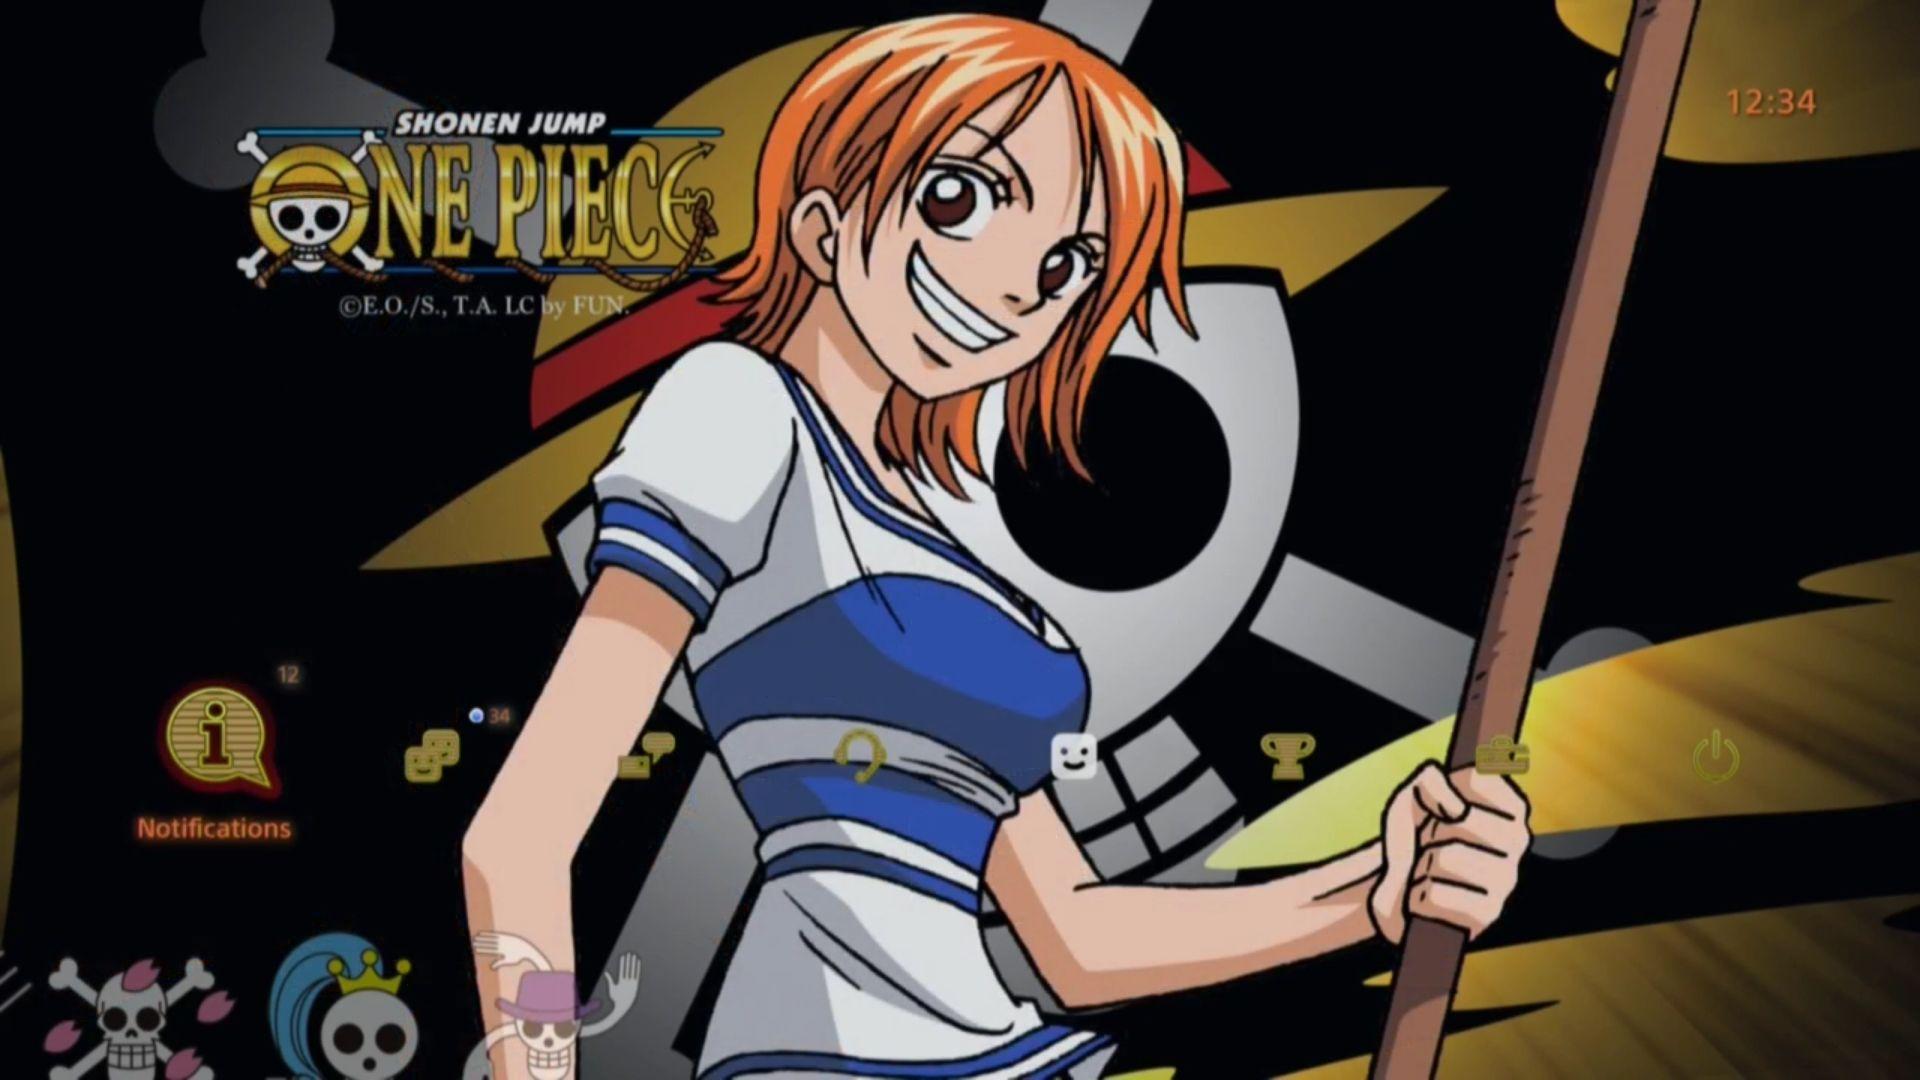 PS4 Gets Two One Piece Dynamic Themes on the PlayStation Store